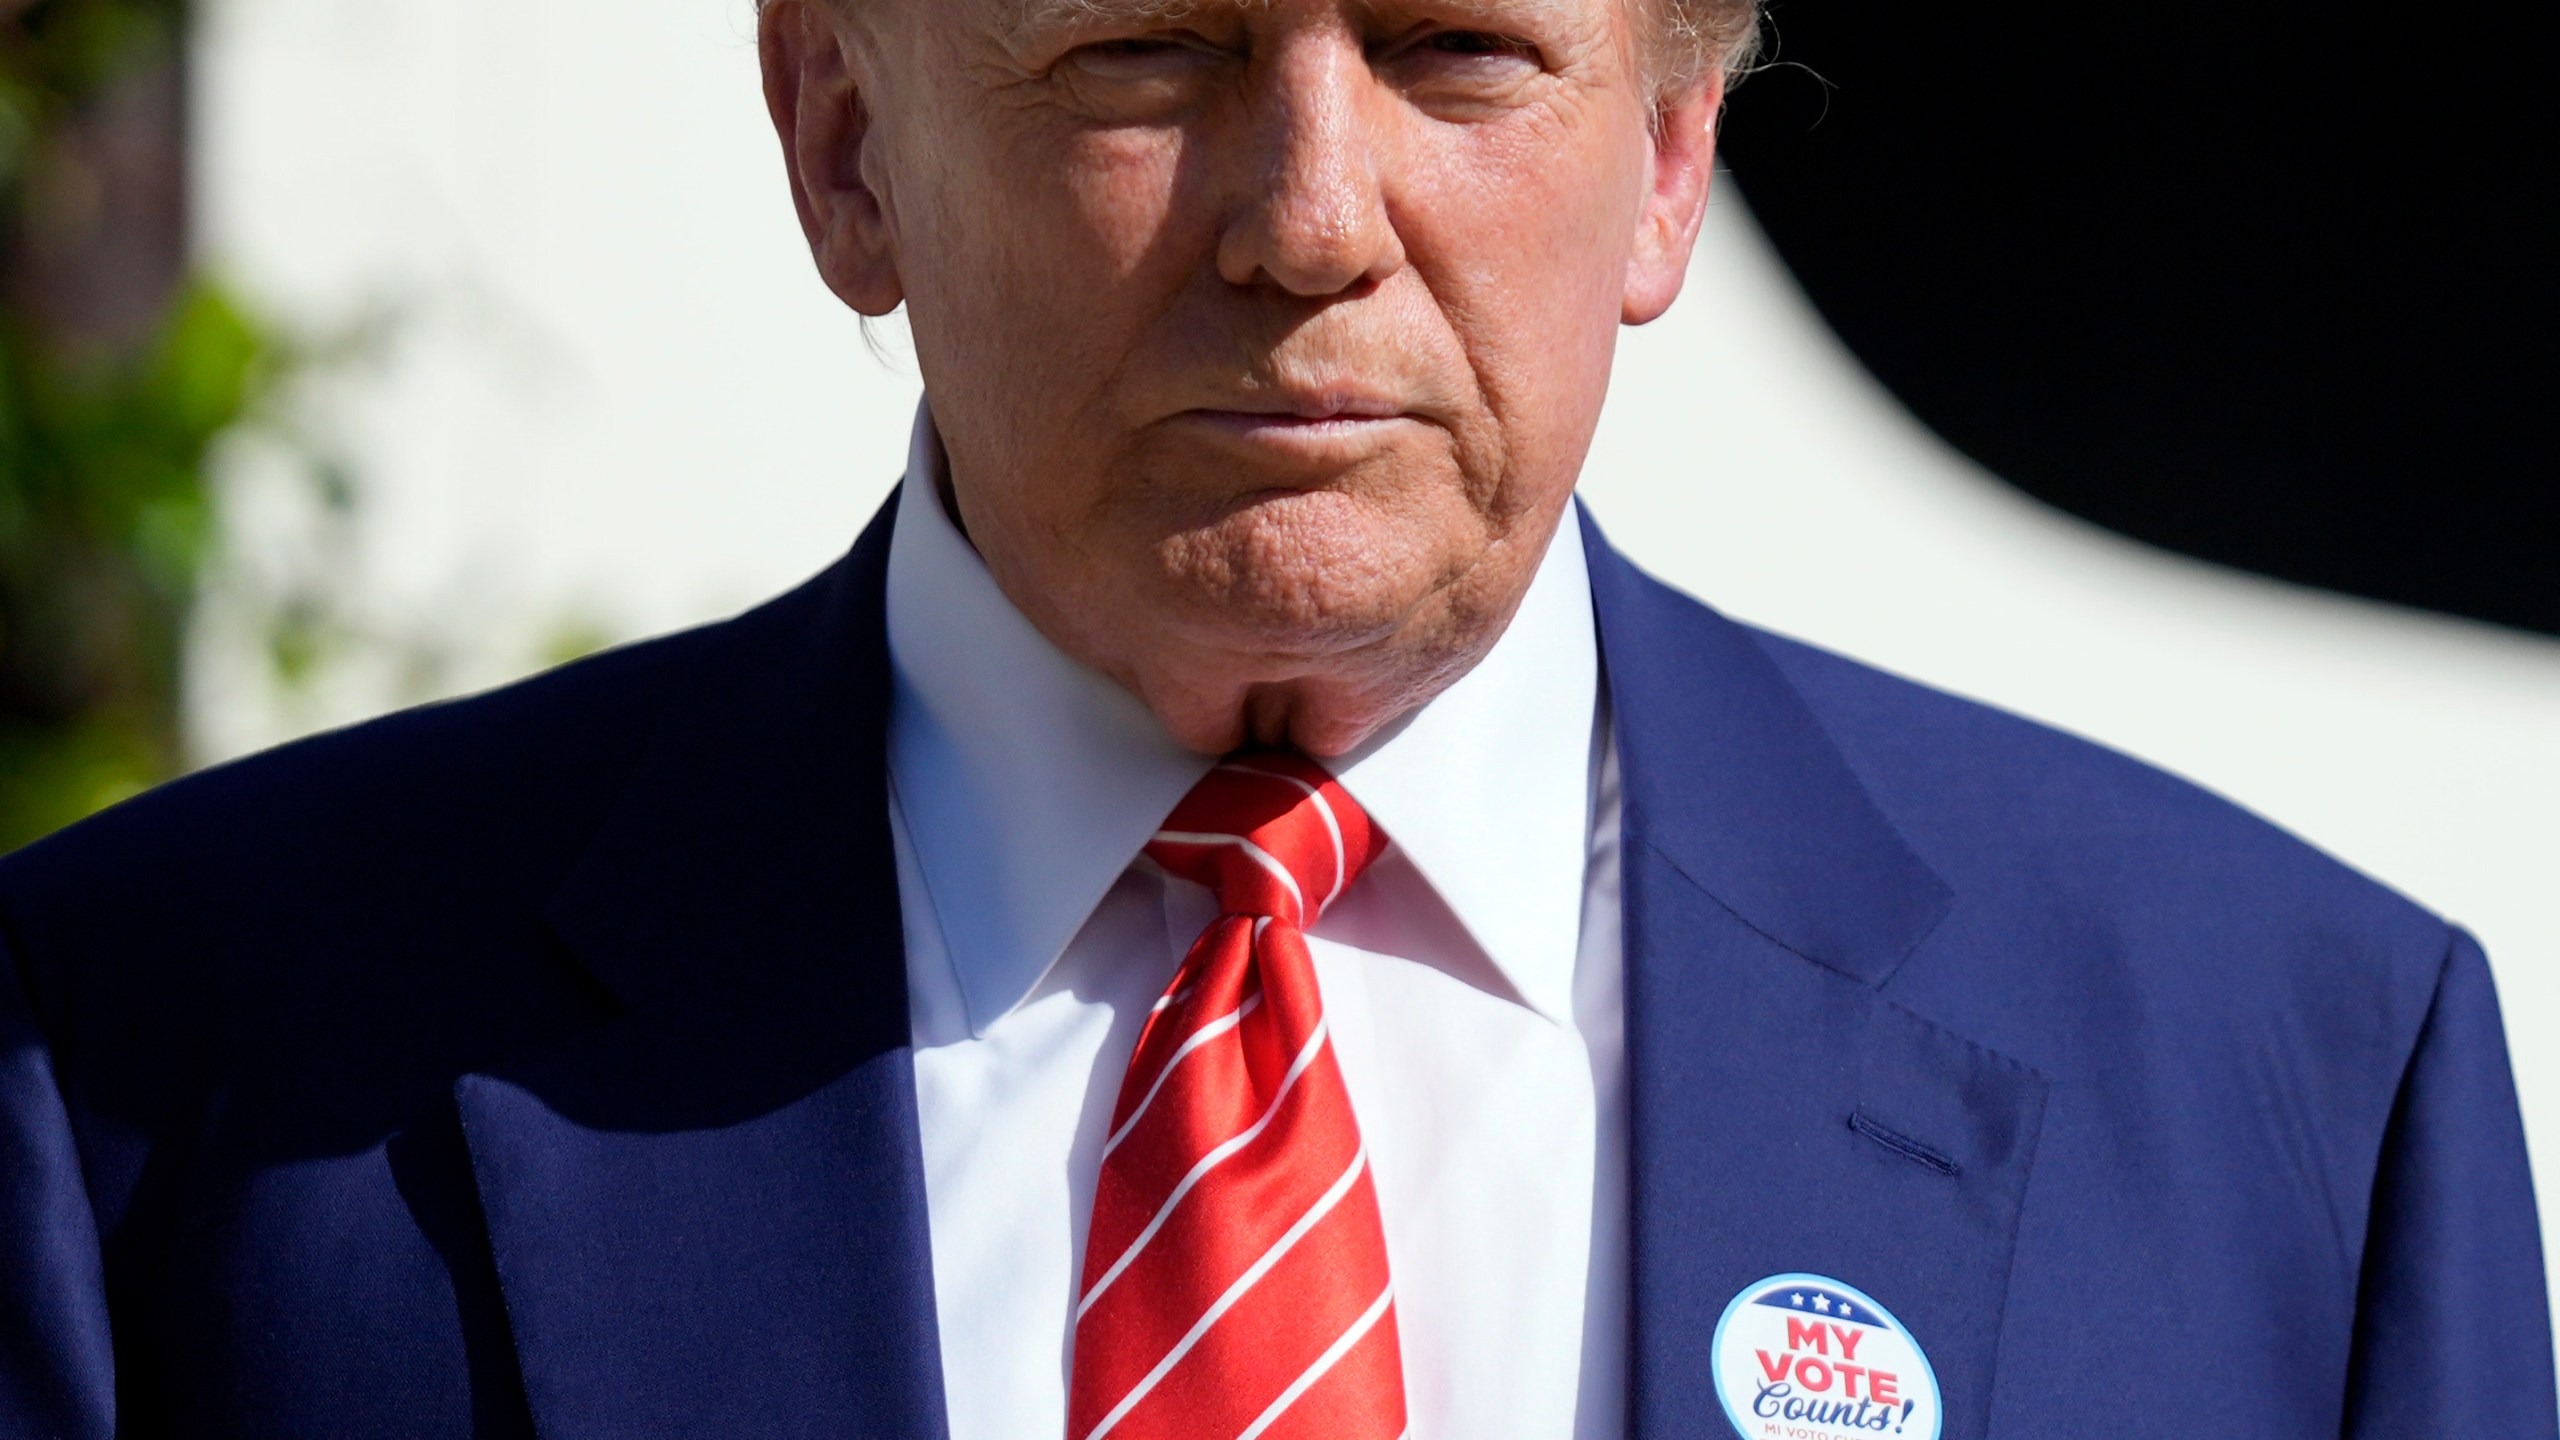 Republican presidential candidate former President Donald Trump listens to a question from a reporter after voting in the Florida primary election in Palm Beach, Fla., Tuesday, March 19, 2024. (AP Photo/Wilfredo Lee)